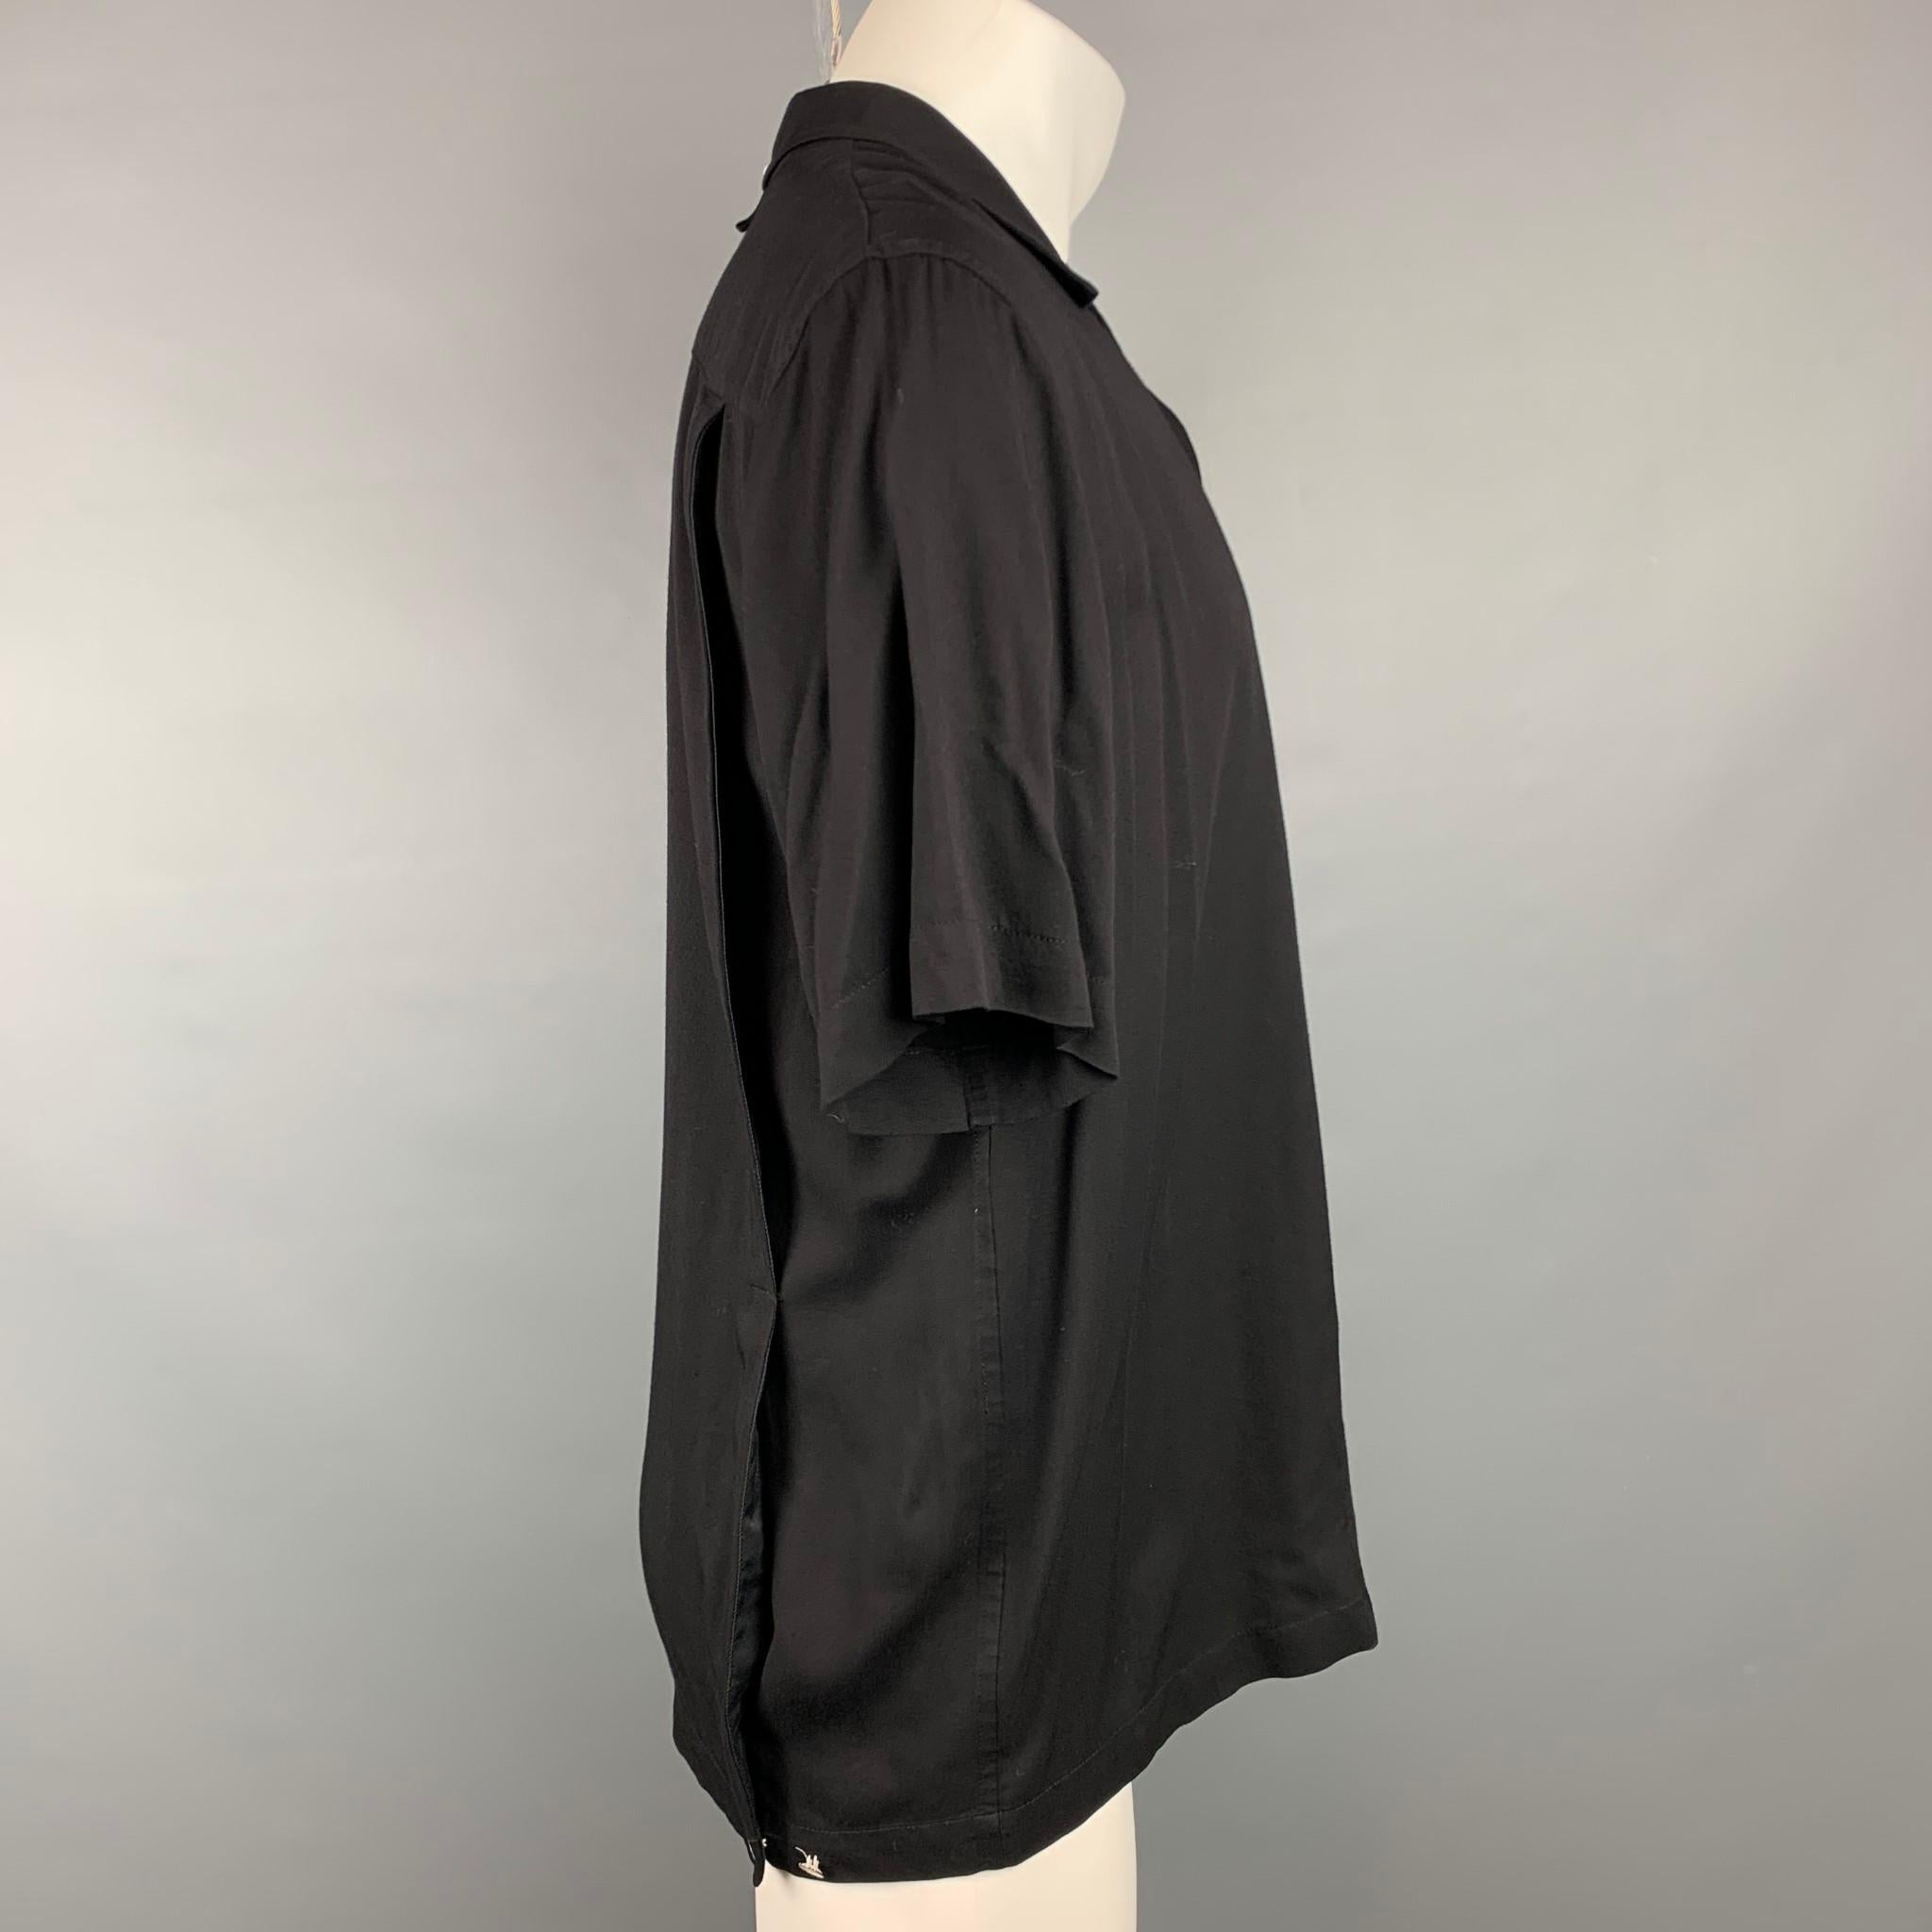 RAG & BONE short sleeve shirt comes in a black viscose featuring a camp collar style, back button details, patch pocket, and a buttoned closure.

Very Good Pre-Owned Condition.
Marked: M

Measurements:

Shoulder: 19 in.
Chest: 46 in.
Sleeve: 10.5